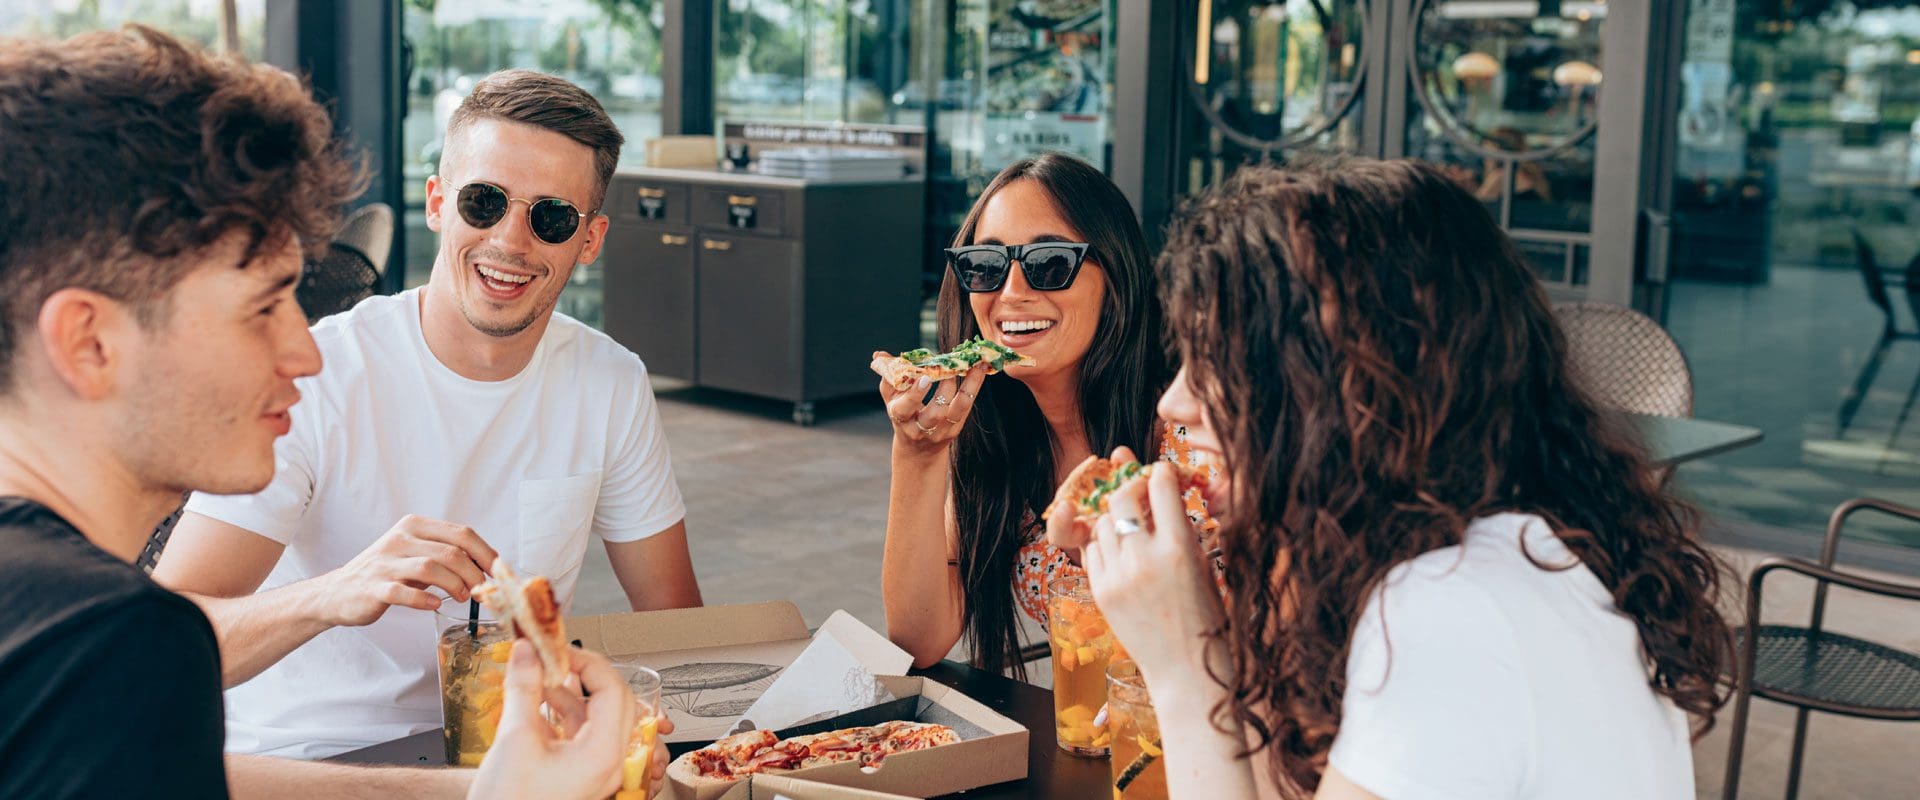 Young individuals eating pizza outside restaurant